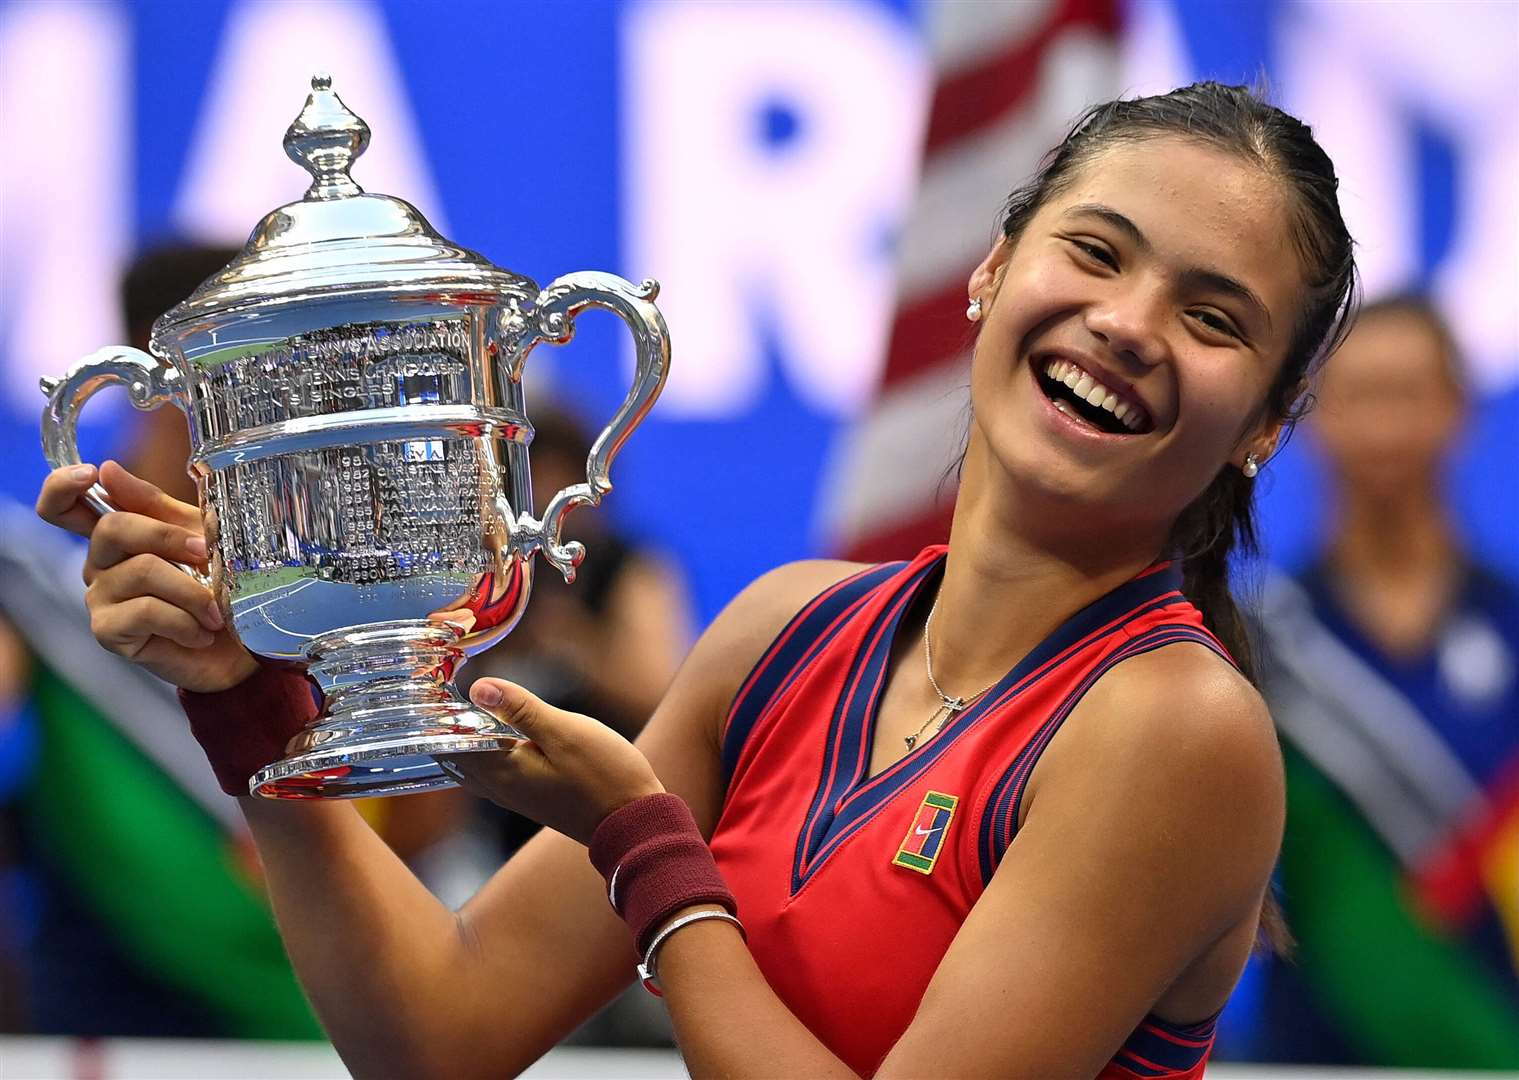 Kent's Emma Raducanu is the favourite to be crowned Sports Personality of the Year this weekend after winning the US Open. Picture: Paul Zimmer via www.imago-images.de/Imago/PA Images